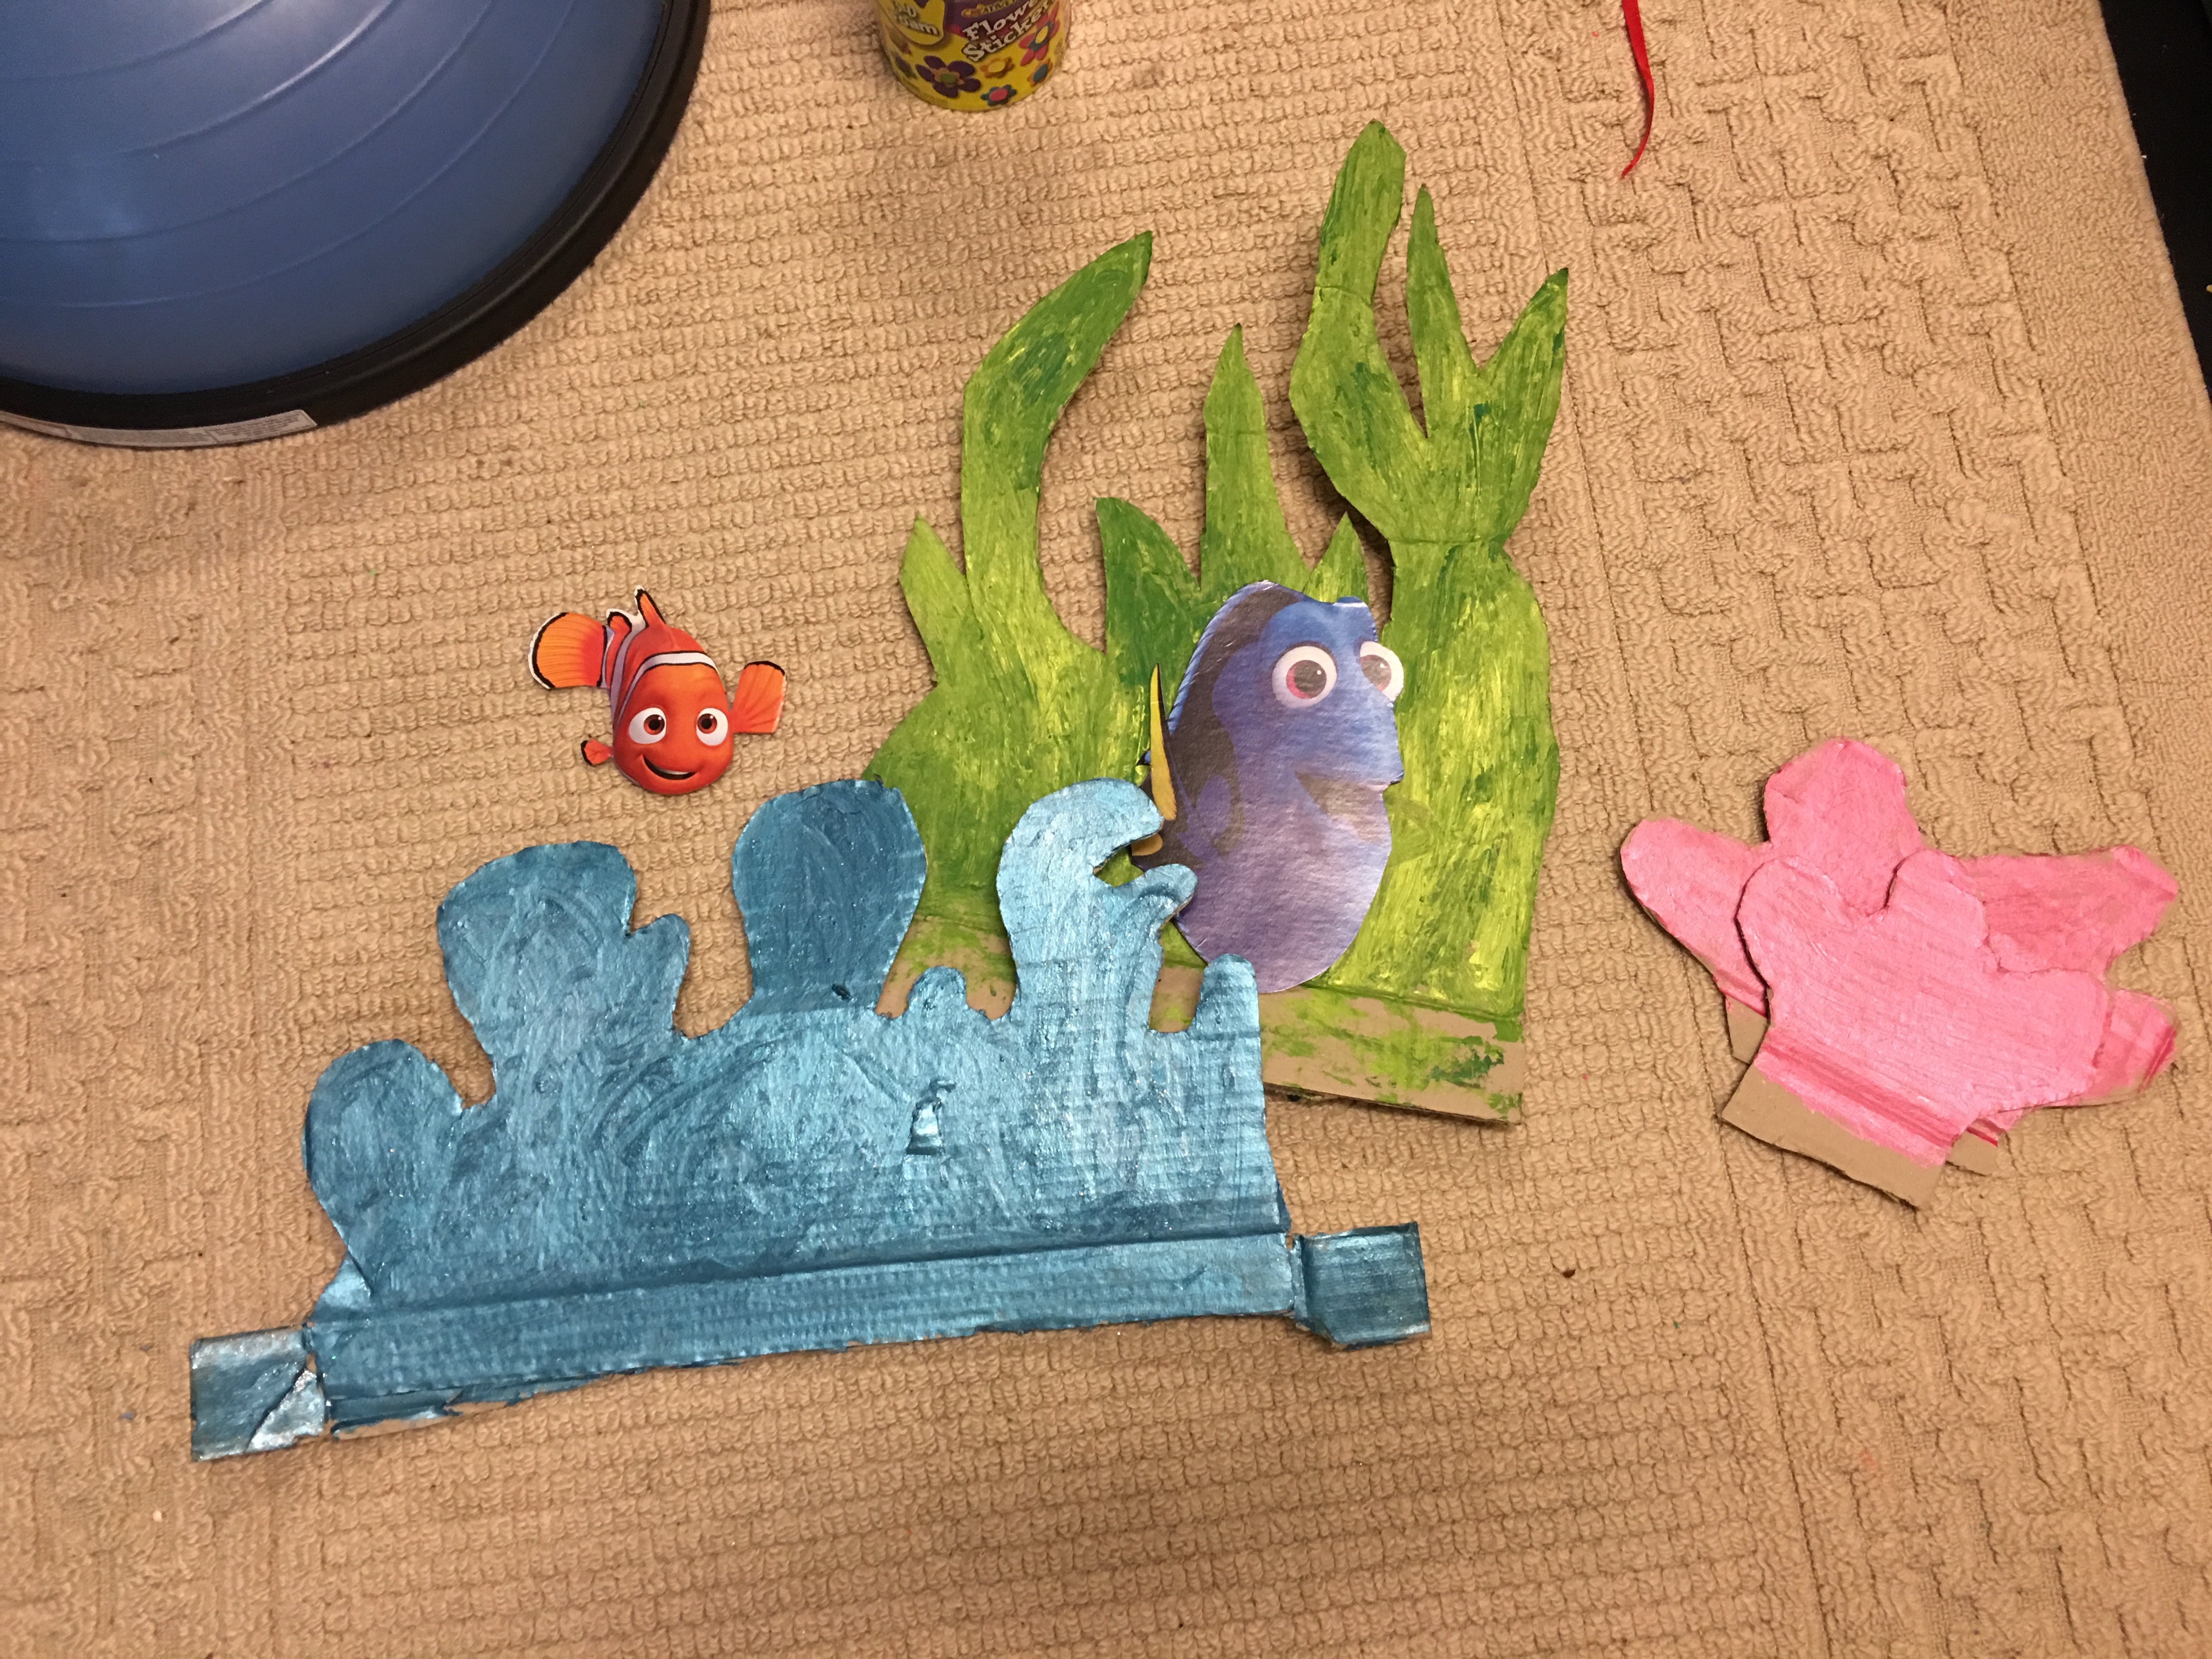 DIY Ocean decor for playroom. Of course getting the kids involved in this creation is half the fun.